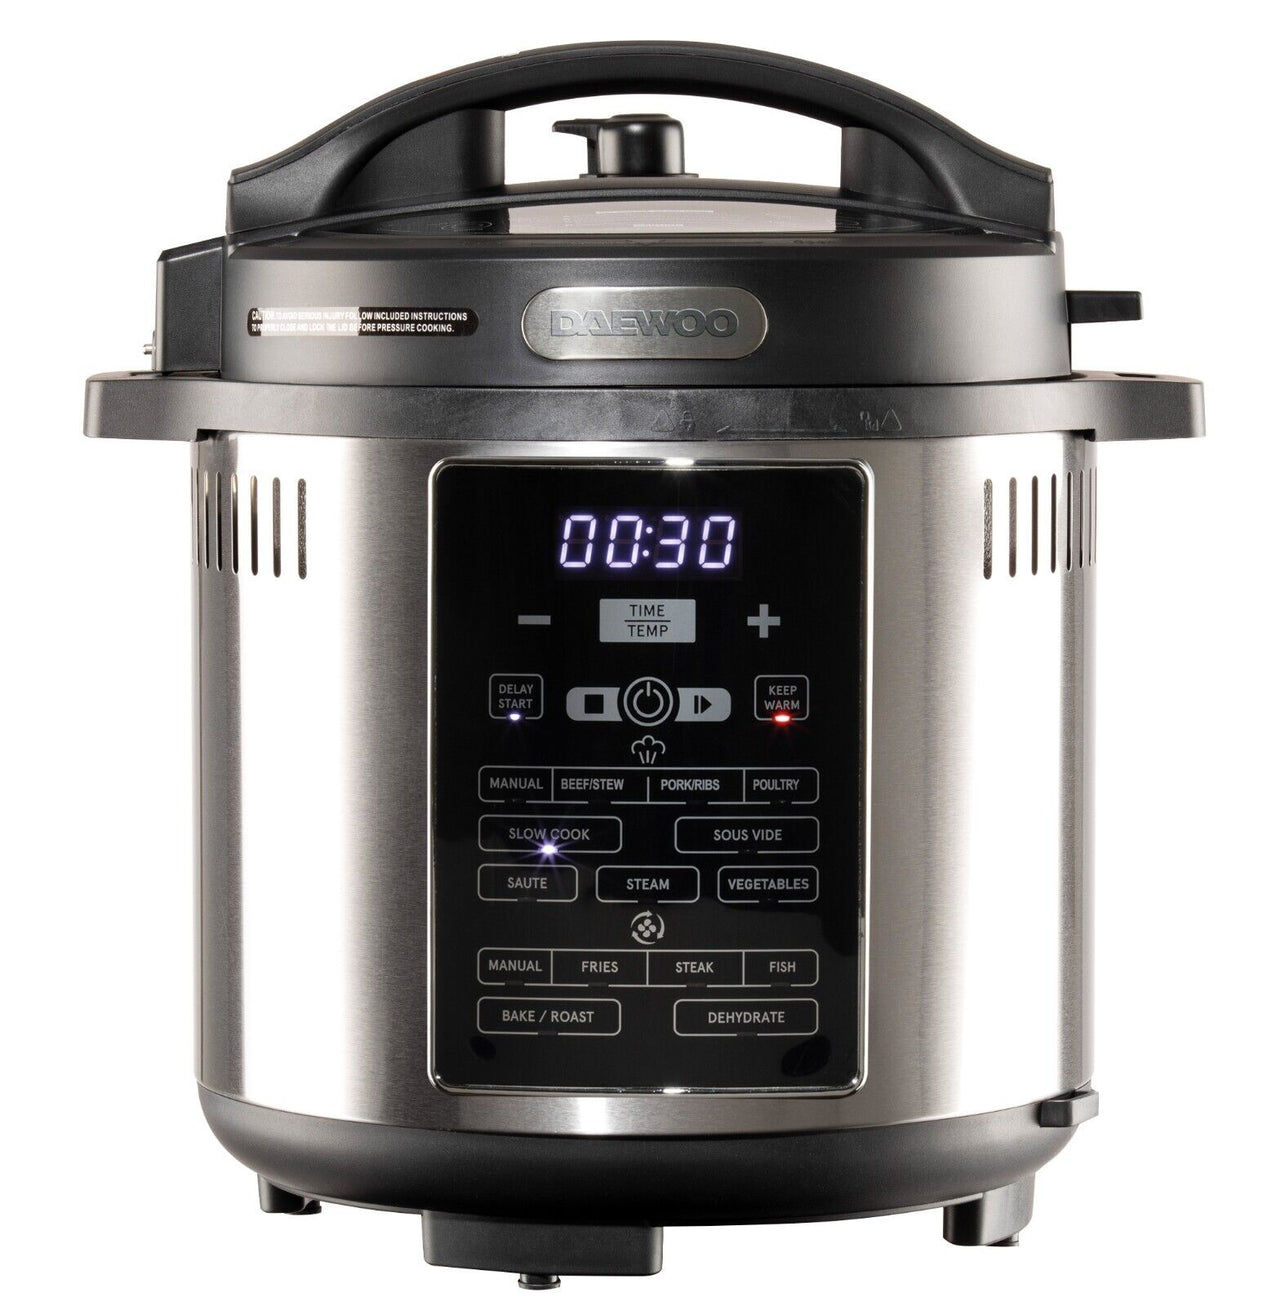 Daewoo 6L 2-in-1 Air Fryer & Pressure Cooker with 15 One Touch Cooking Pre-Sets SDA2621GE